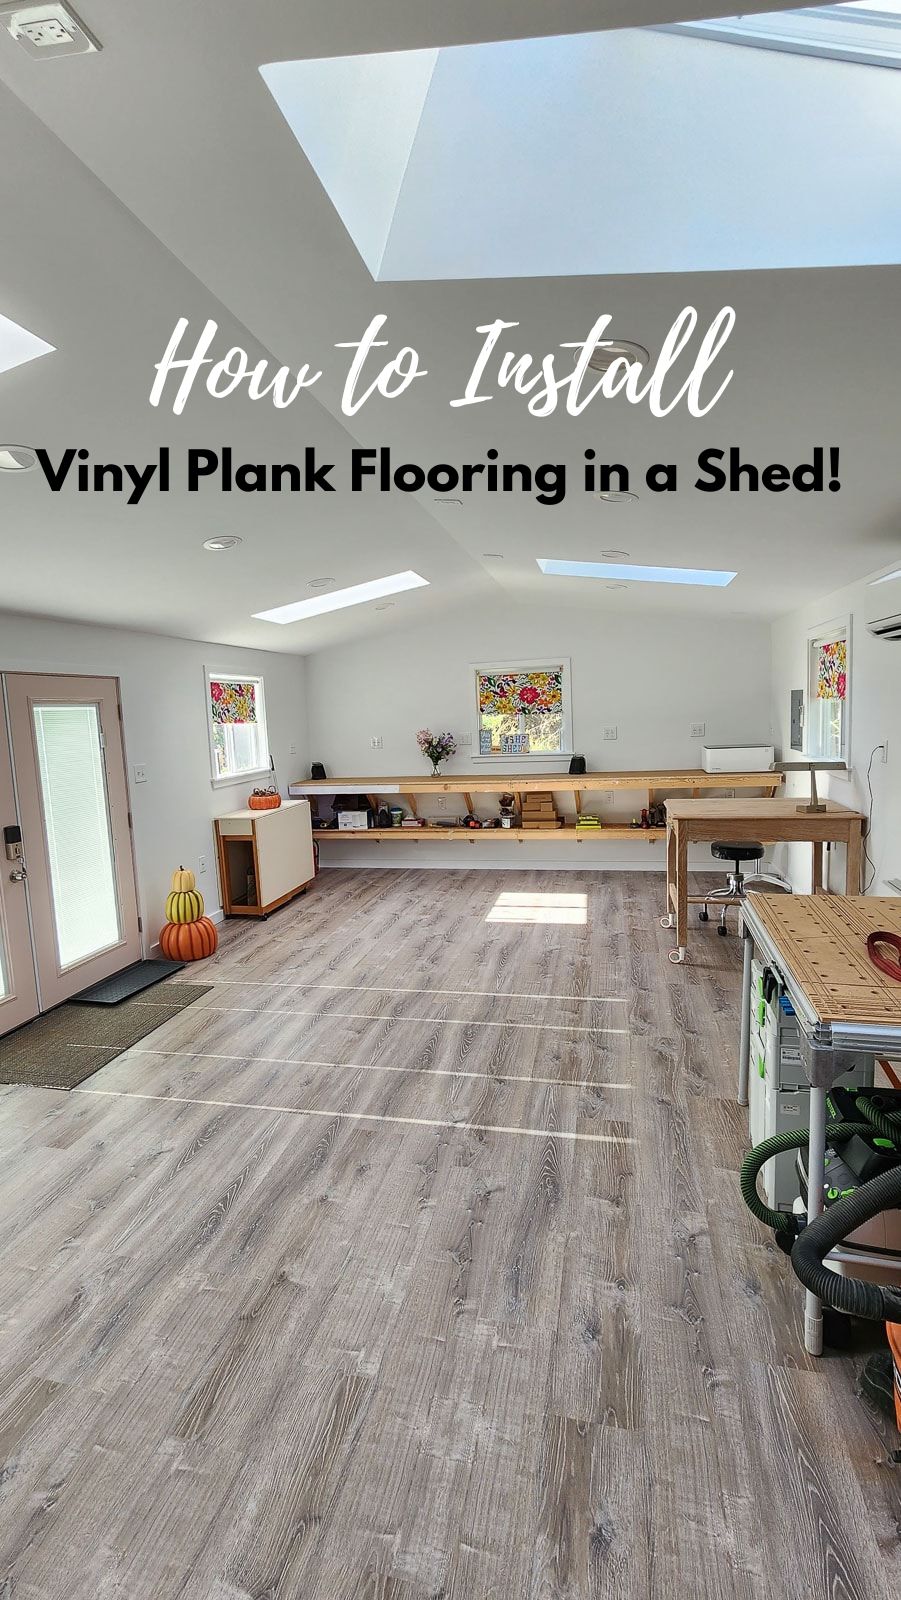 How to Install Vinyl Plank Flooring and Baseboards in a Shed! - Thrift Diving